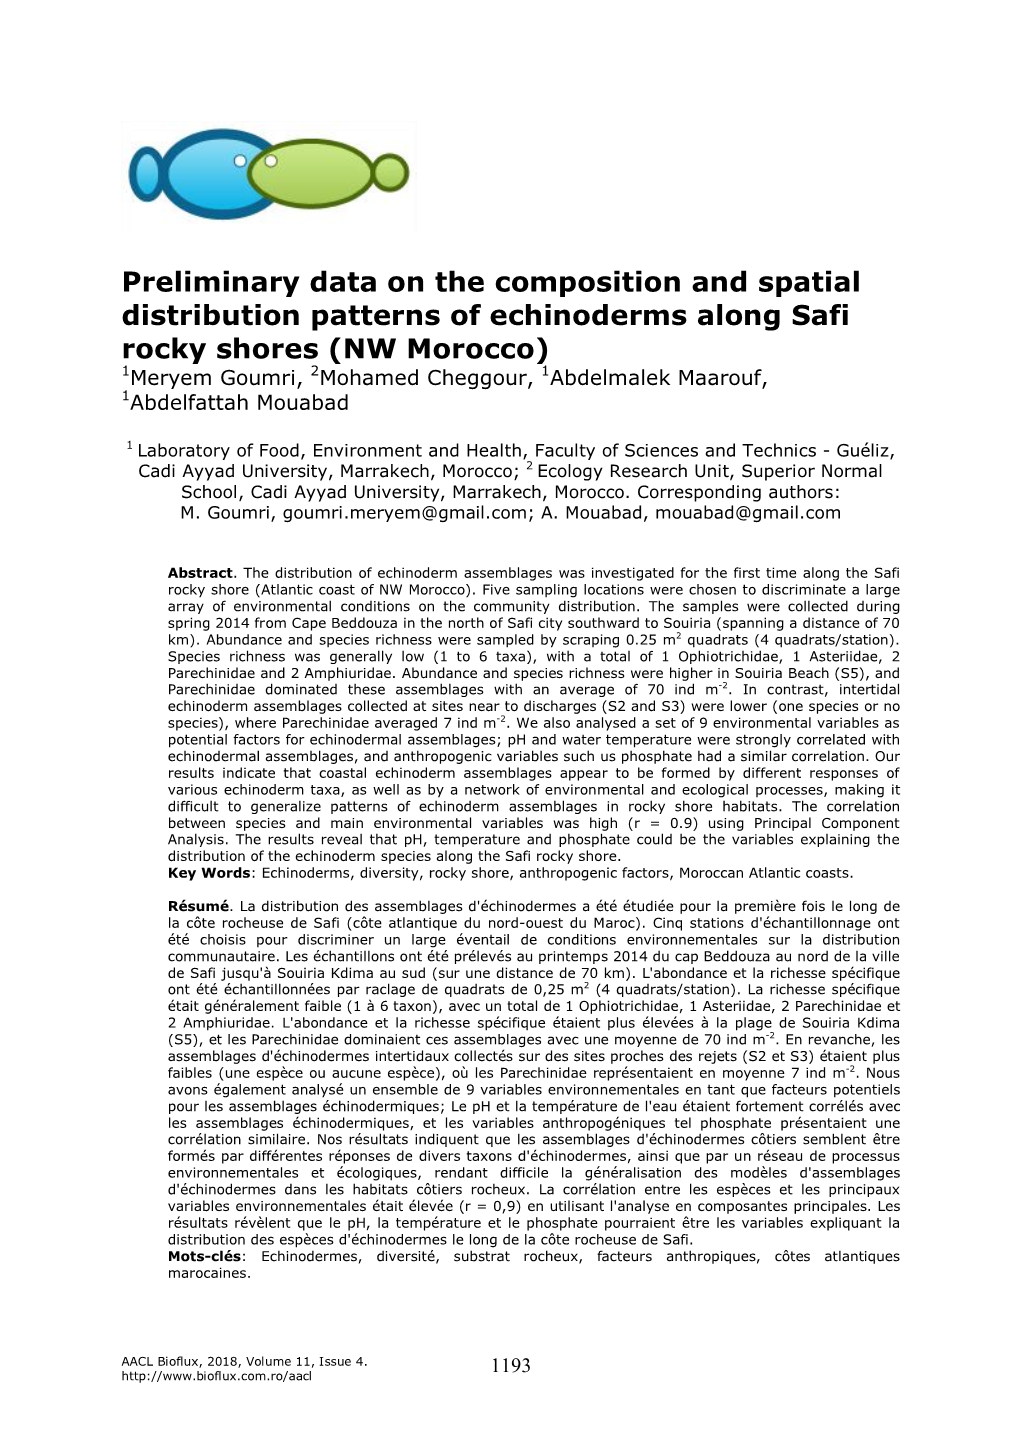 Preliminary Data on the Composition and Spatial Distribution Patterns Of